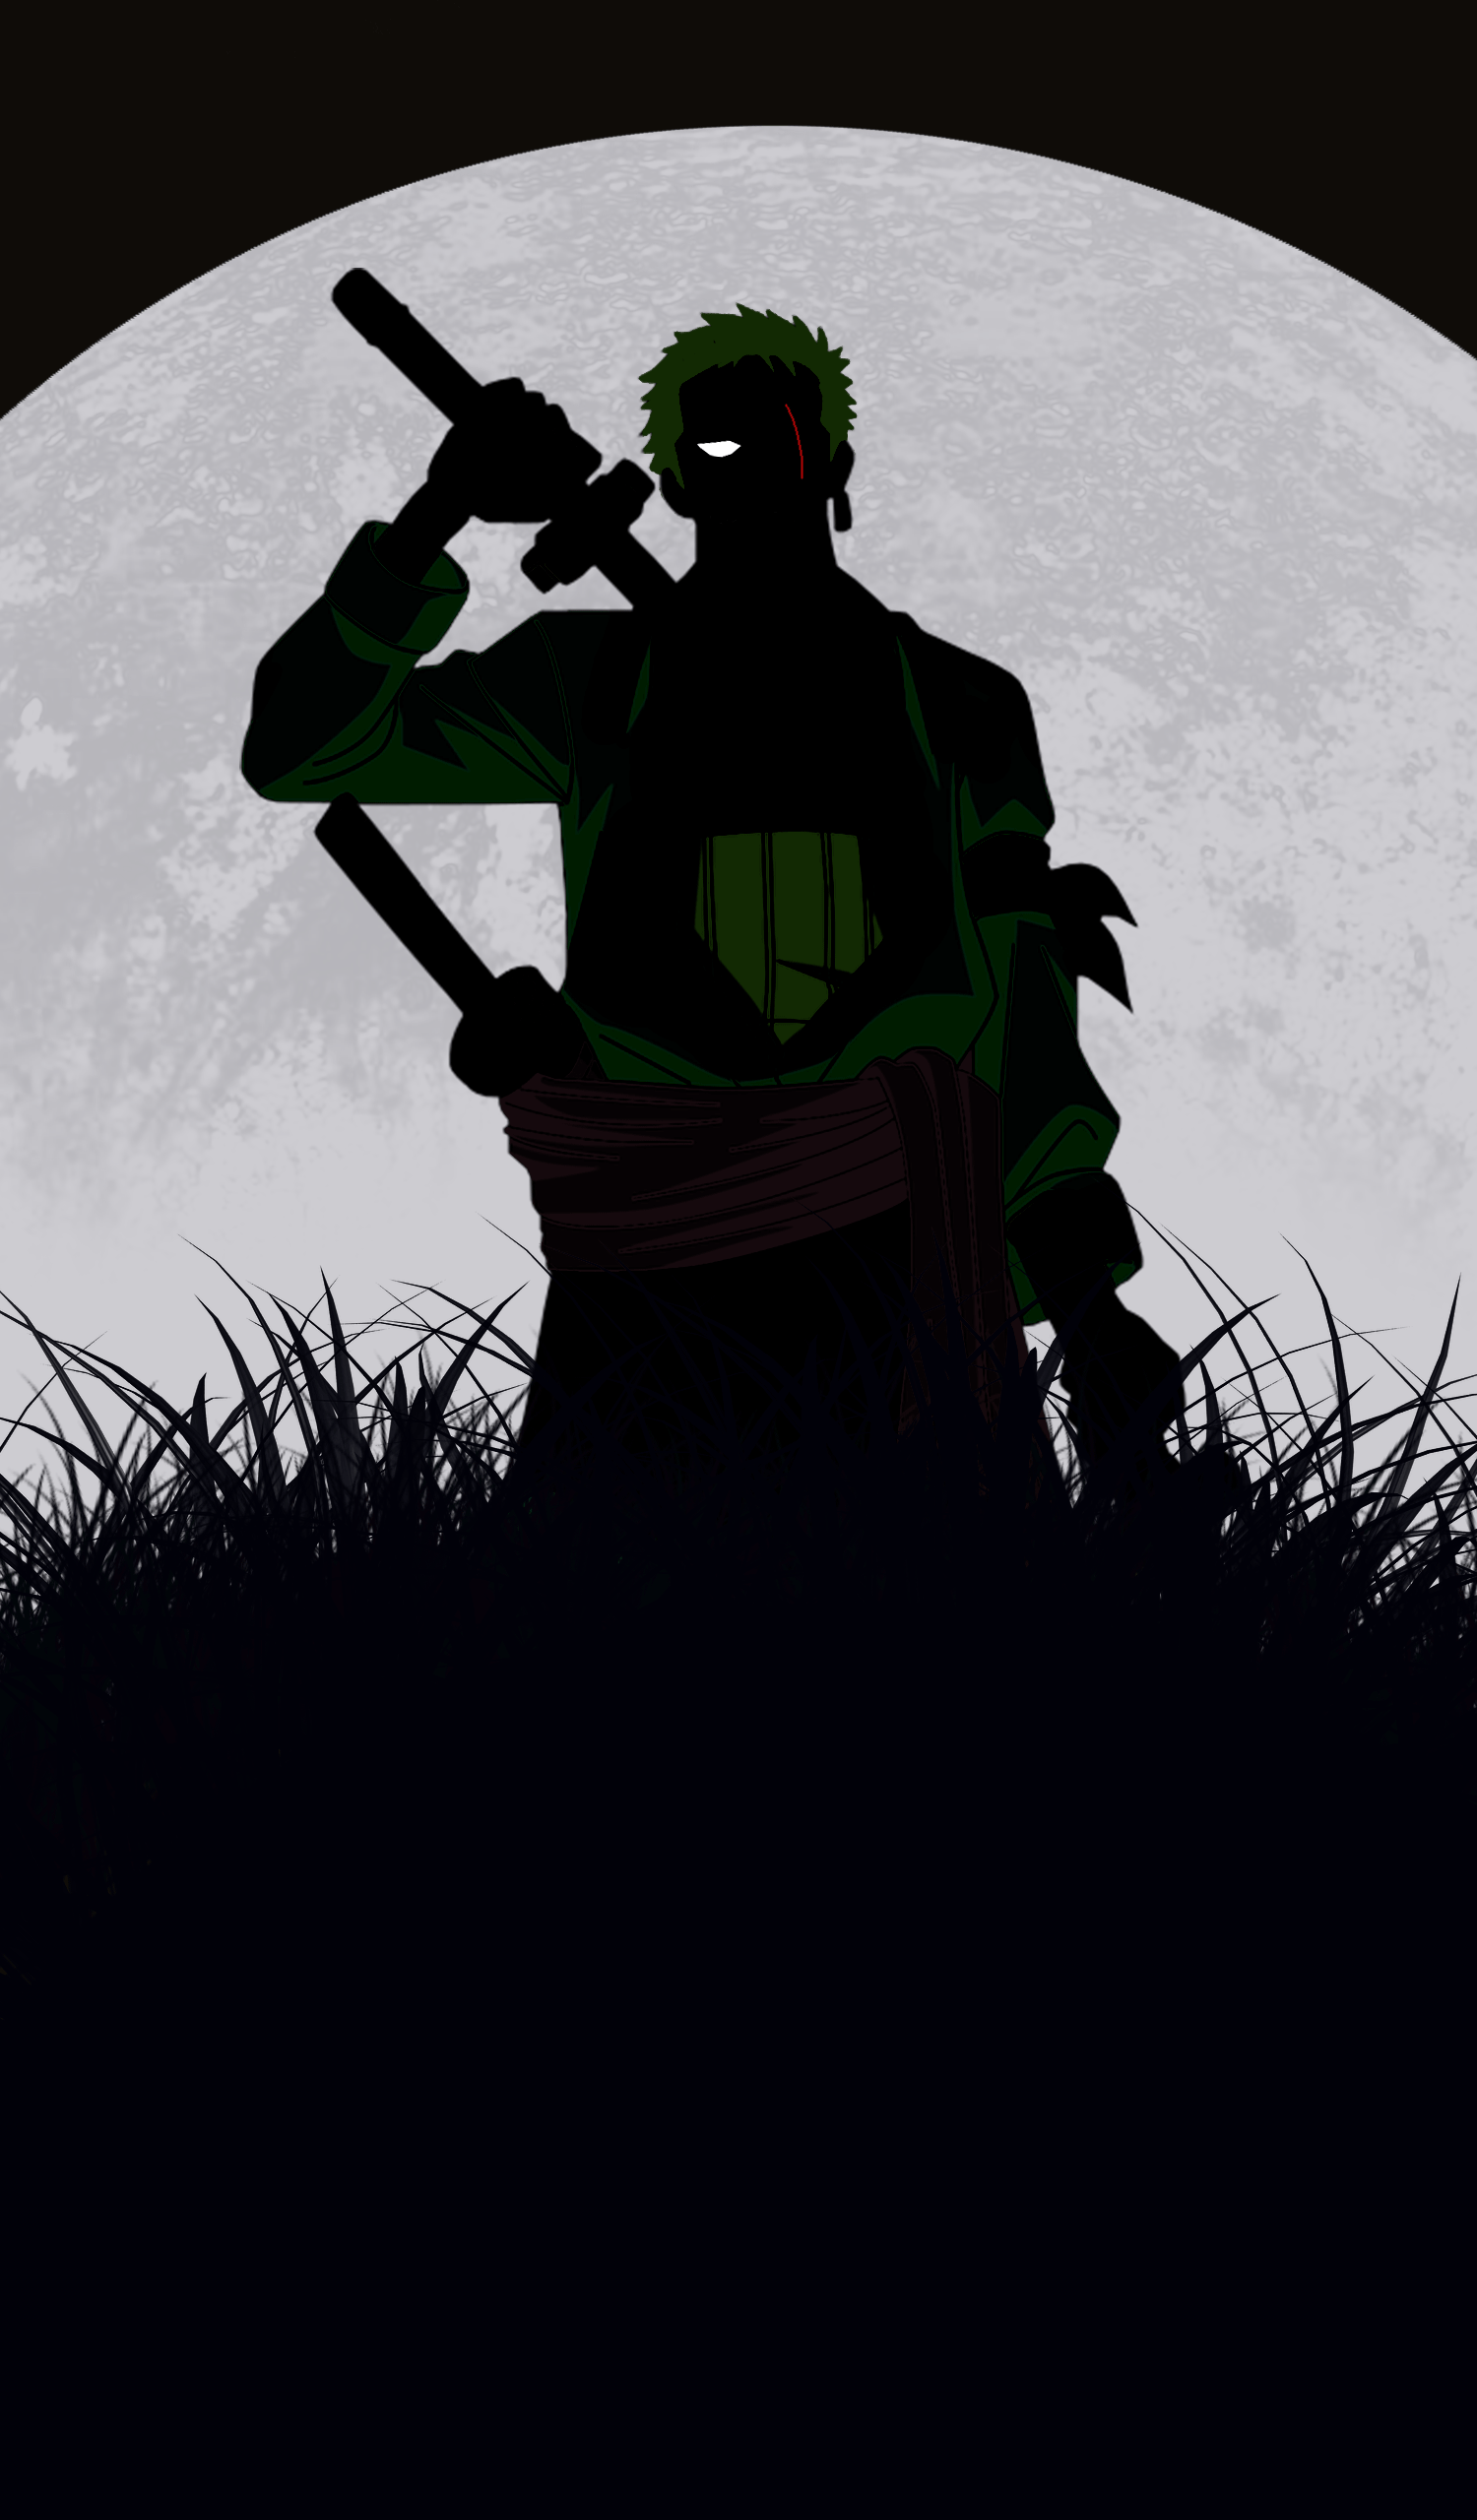 Here is a better version of my Zoro Wallpaper. Is it good enough? Will make Luffy and others if you guys like it